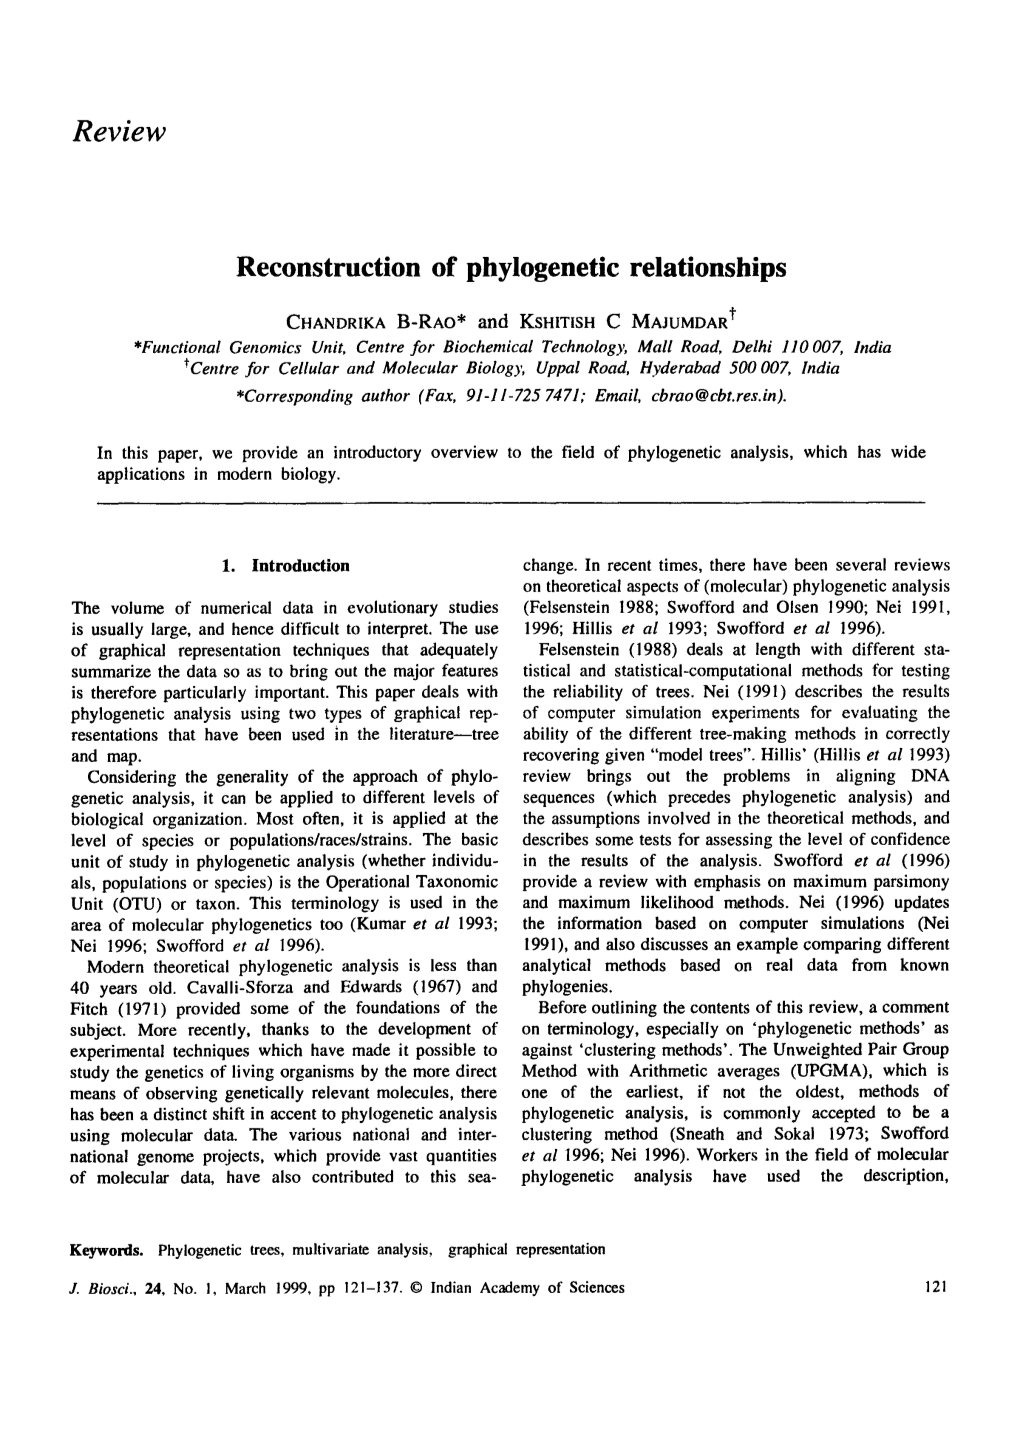 Reconstruction of Phylogenetic Relationships